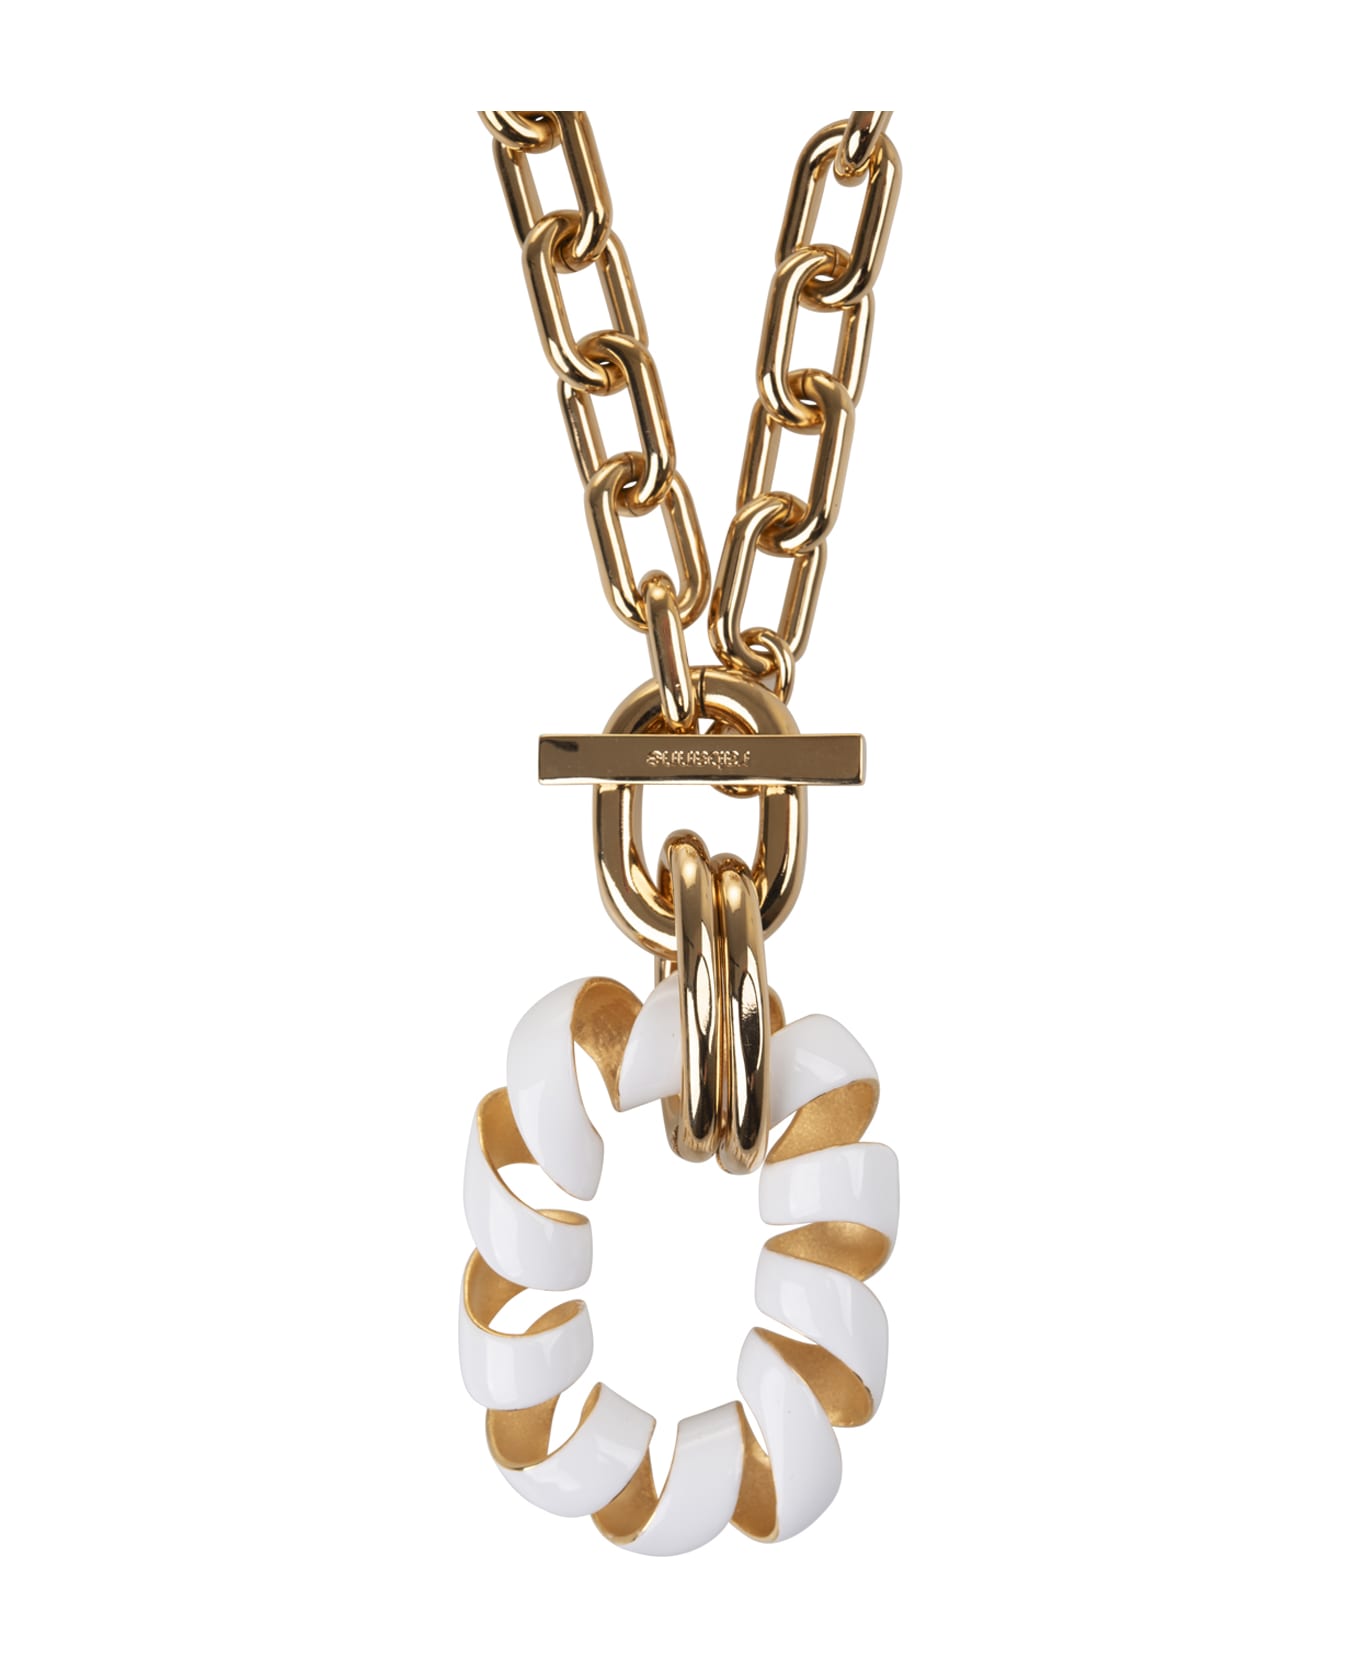 Paco Rabanne Gold Double Xl Link Twist Necklace With White Pendant - Gold